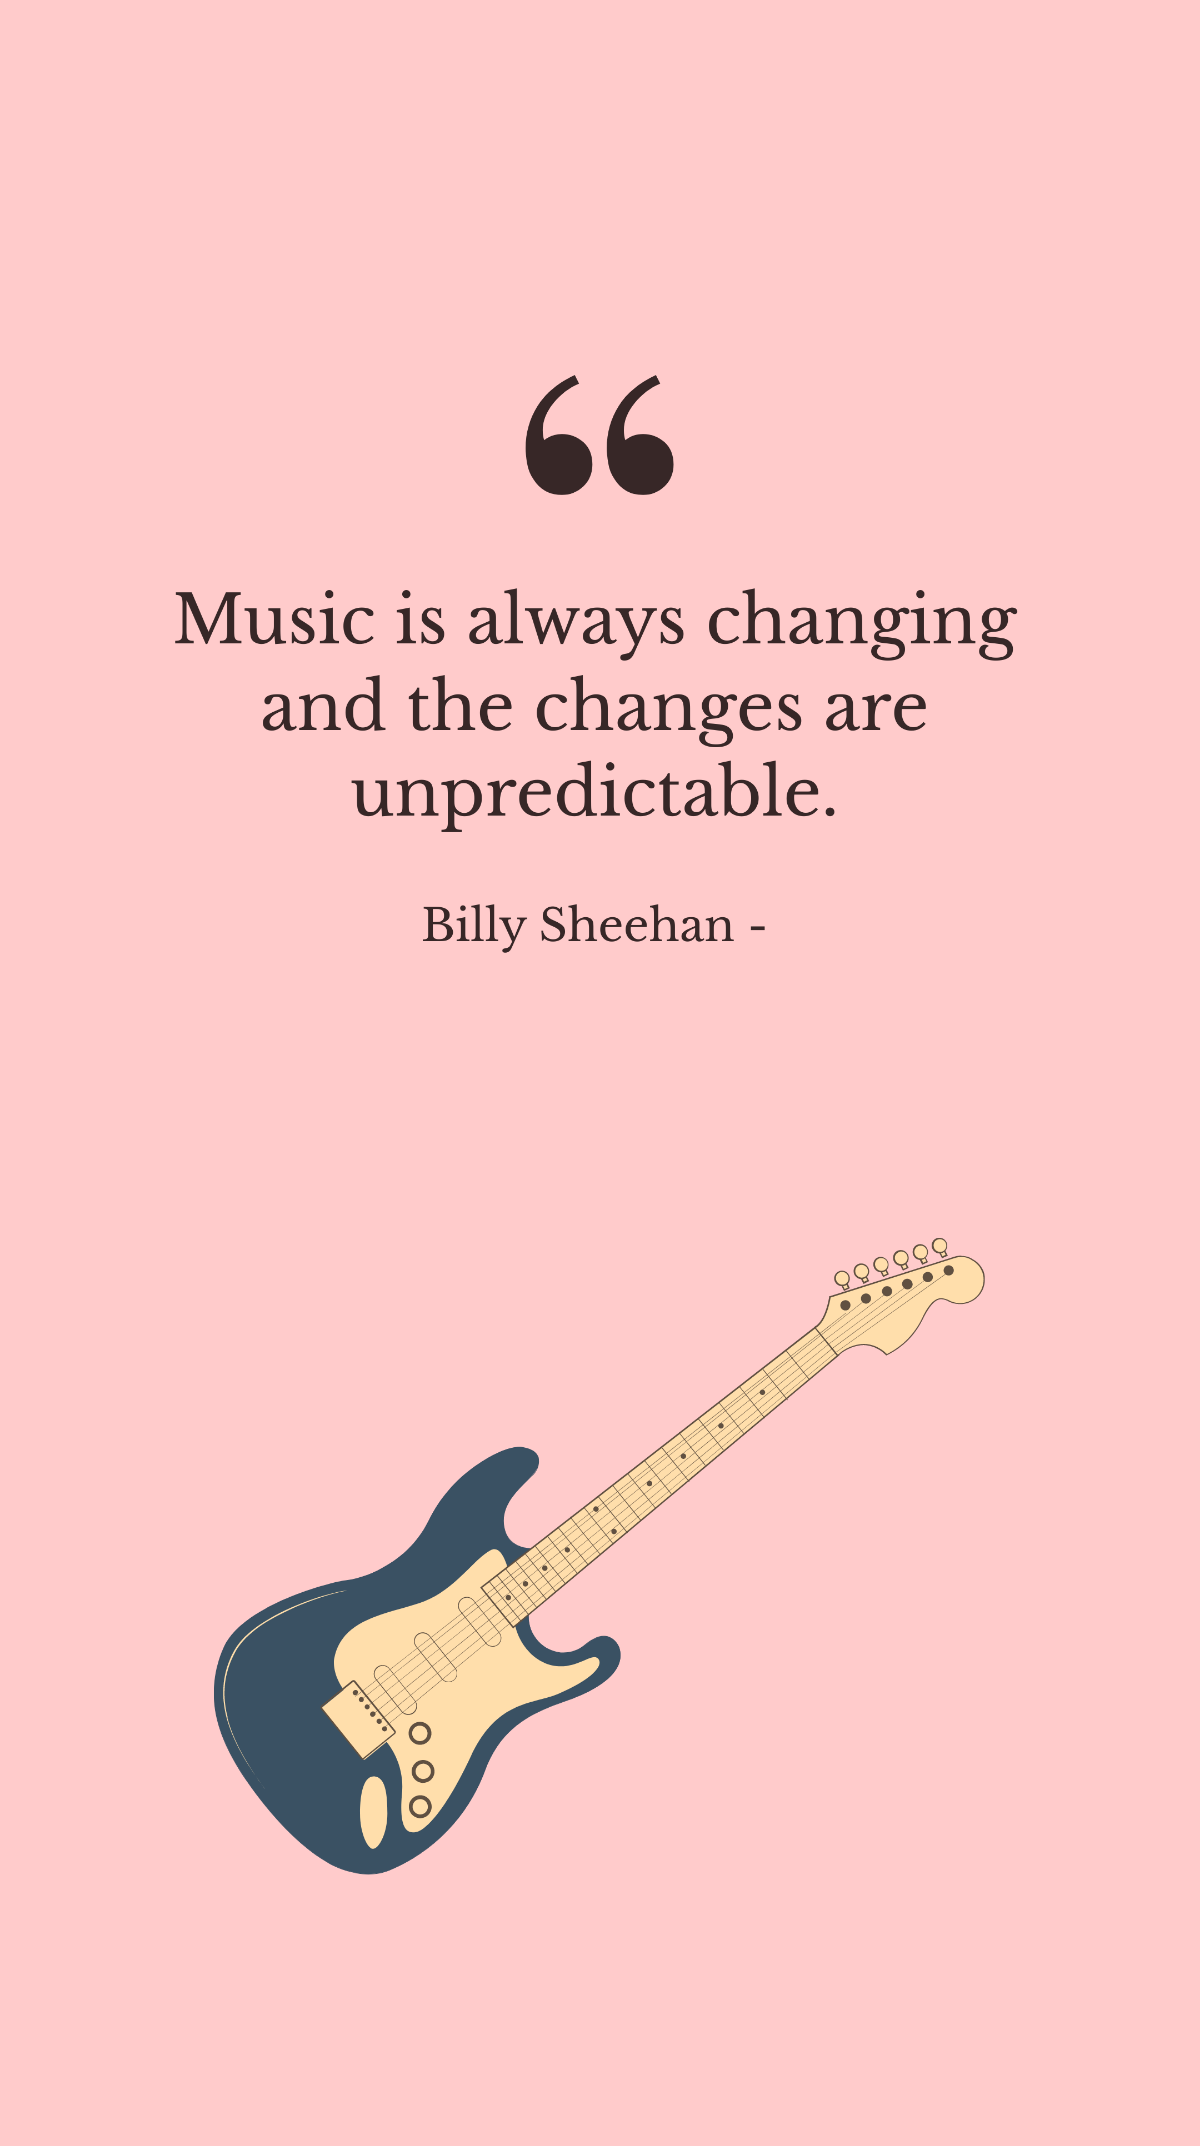 Billy Sheehan - Music is always changing and the changes are unpredictable. Template